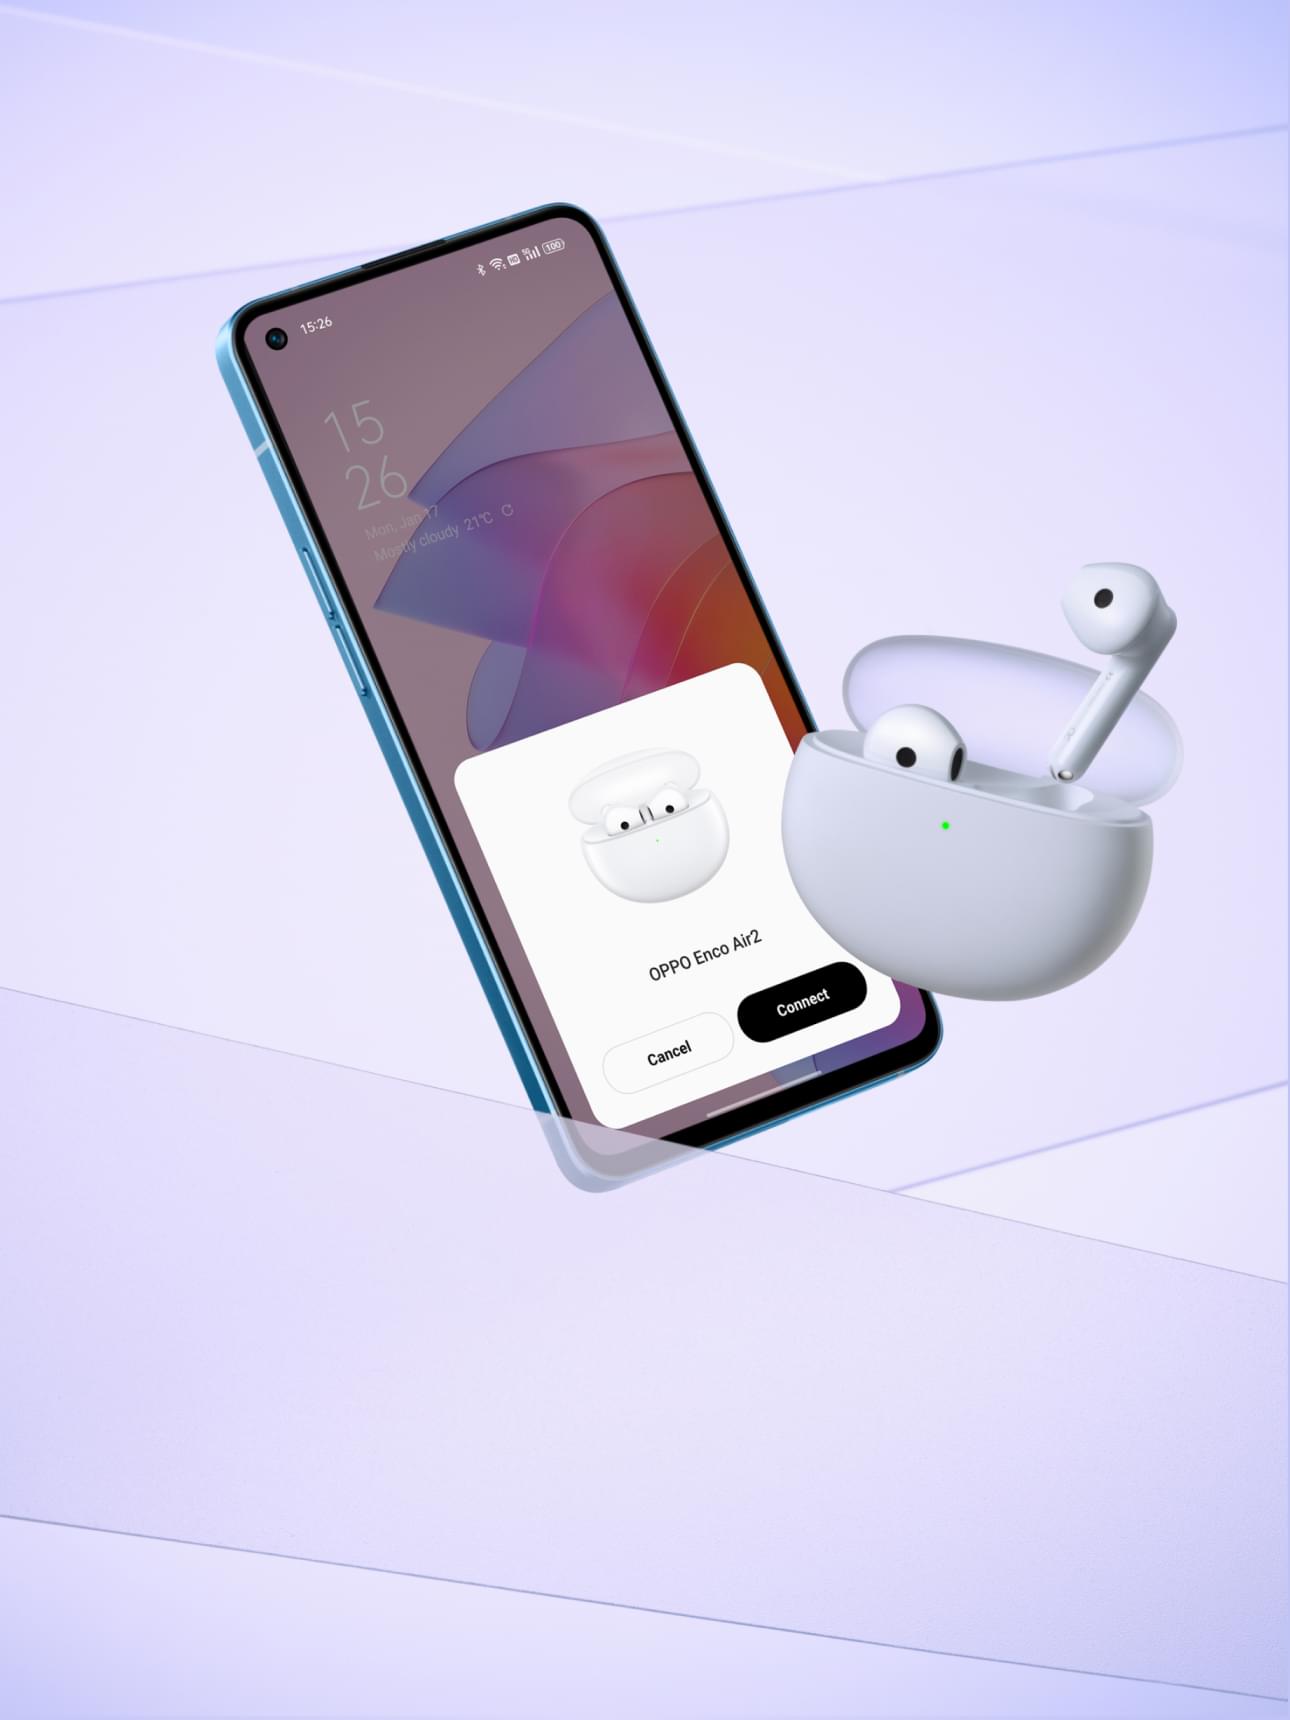 Oppo Enco Air 2 Pro vs Oppo Enco Air 2i: What is the difference?